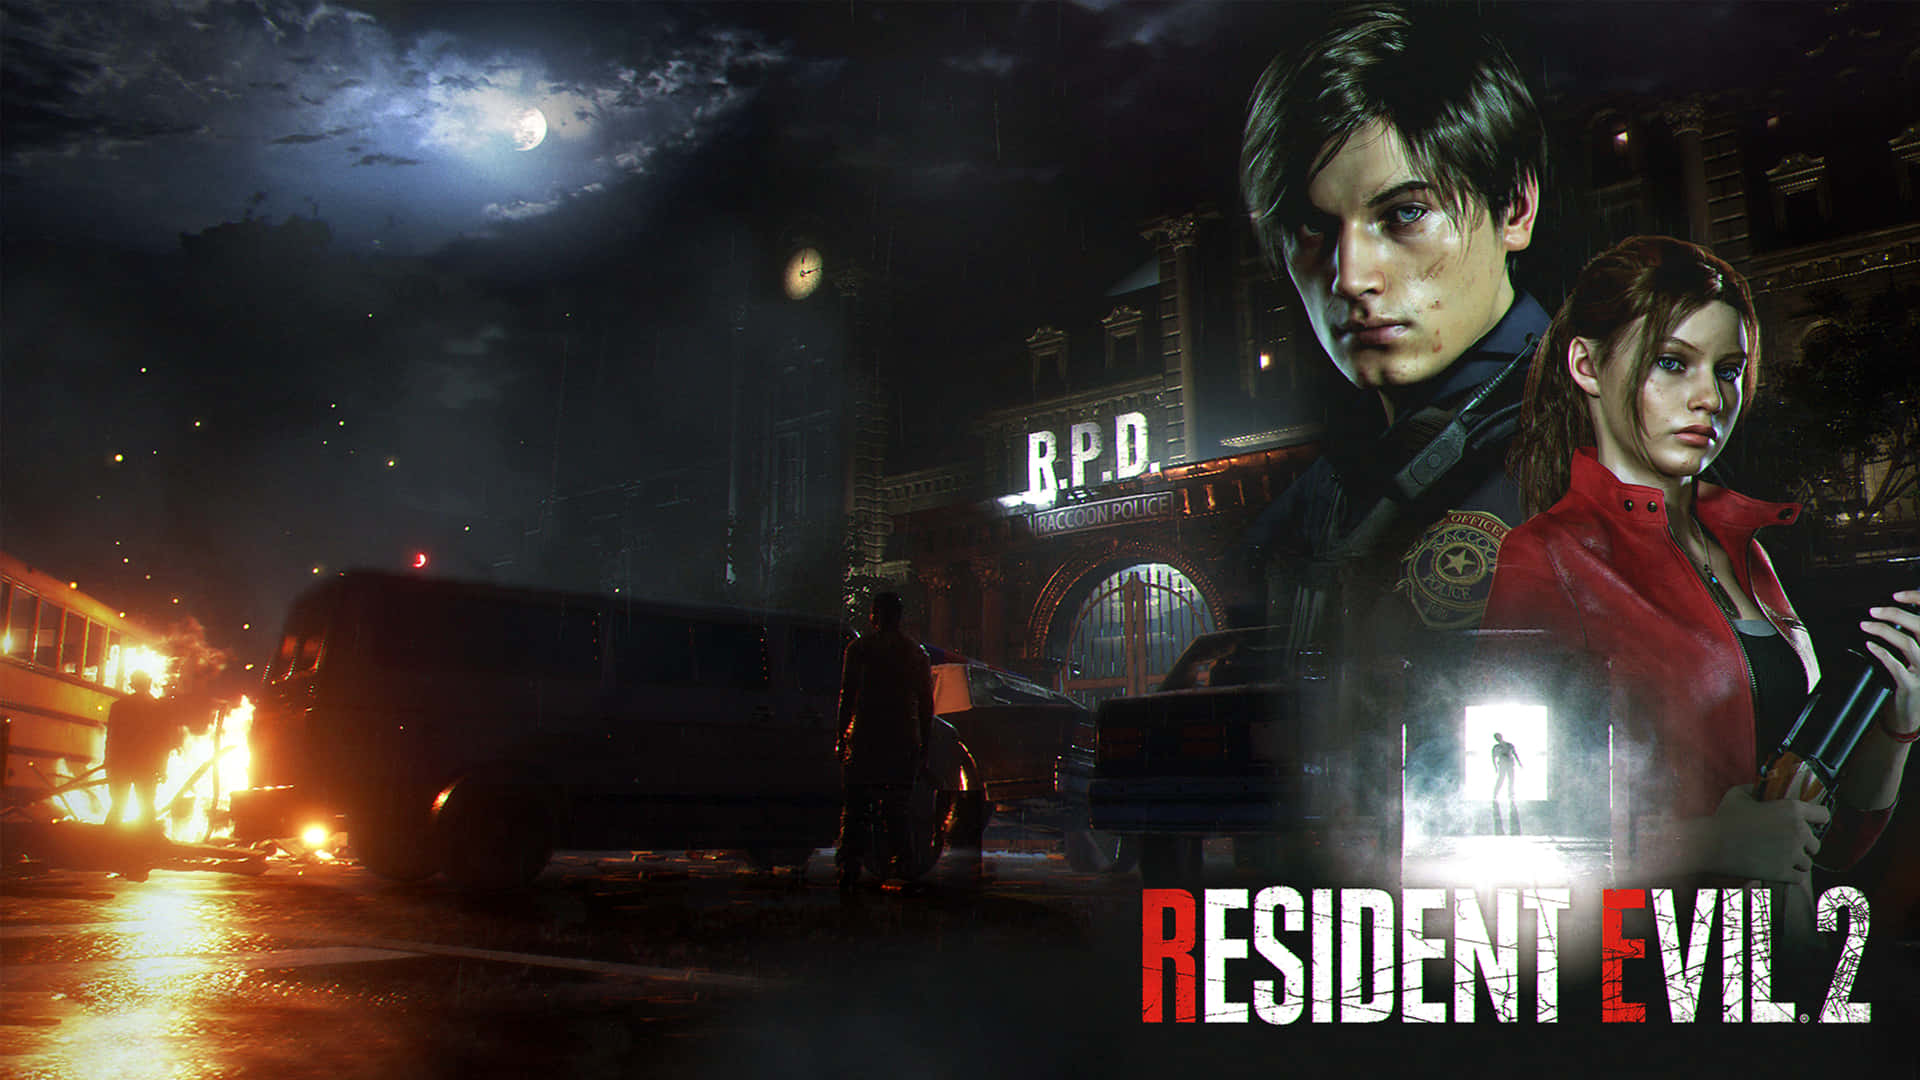 "Dare to explore the eerie Racoon City Police Department in Resident Evil 2"